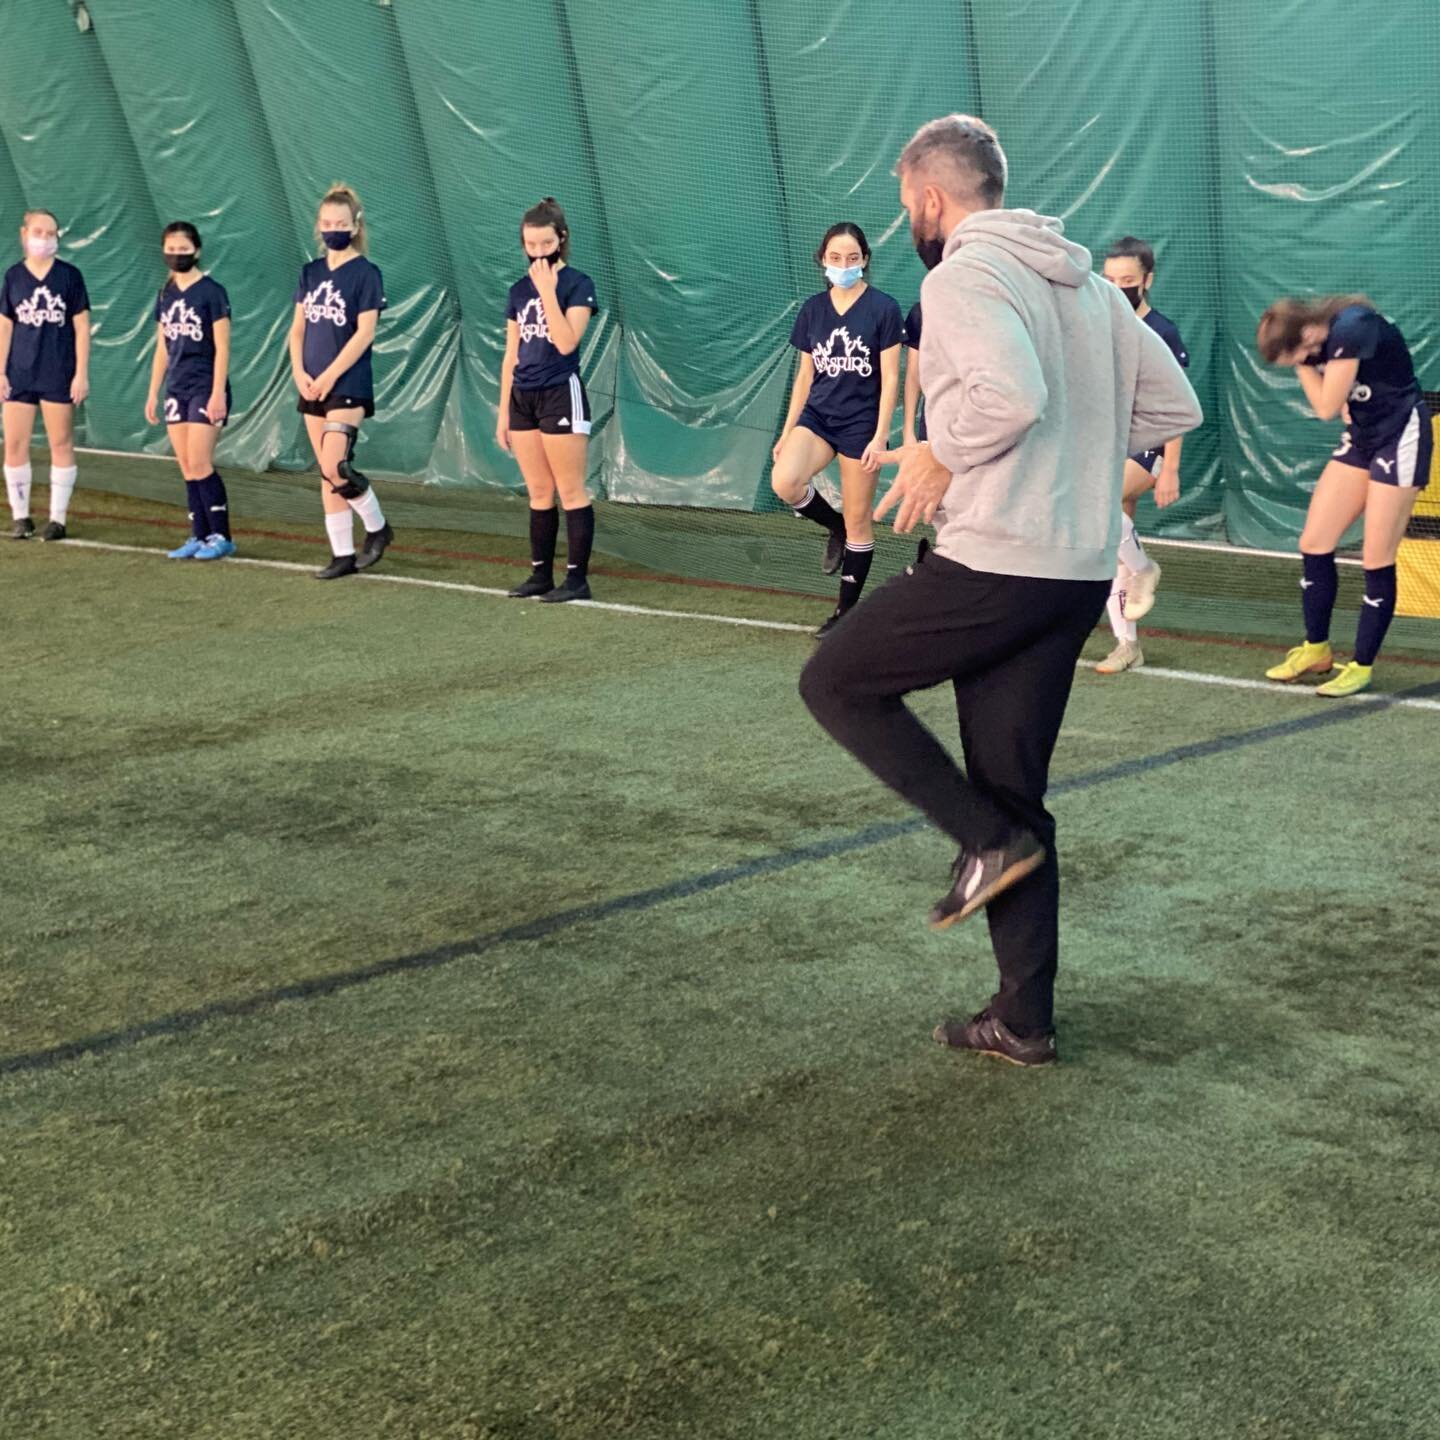 @bradthies  and @blarkins6 had a great time teaching sprinting mechanics to the Hot Spurs girls soccer teams Sunday night! 
#soccer #soccerdevelopment #girlssoccer #rmu #hotspurs #development